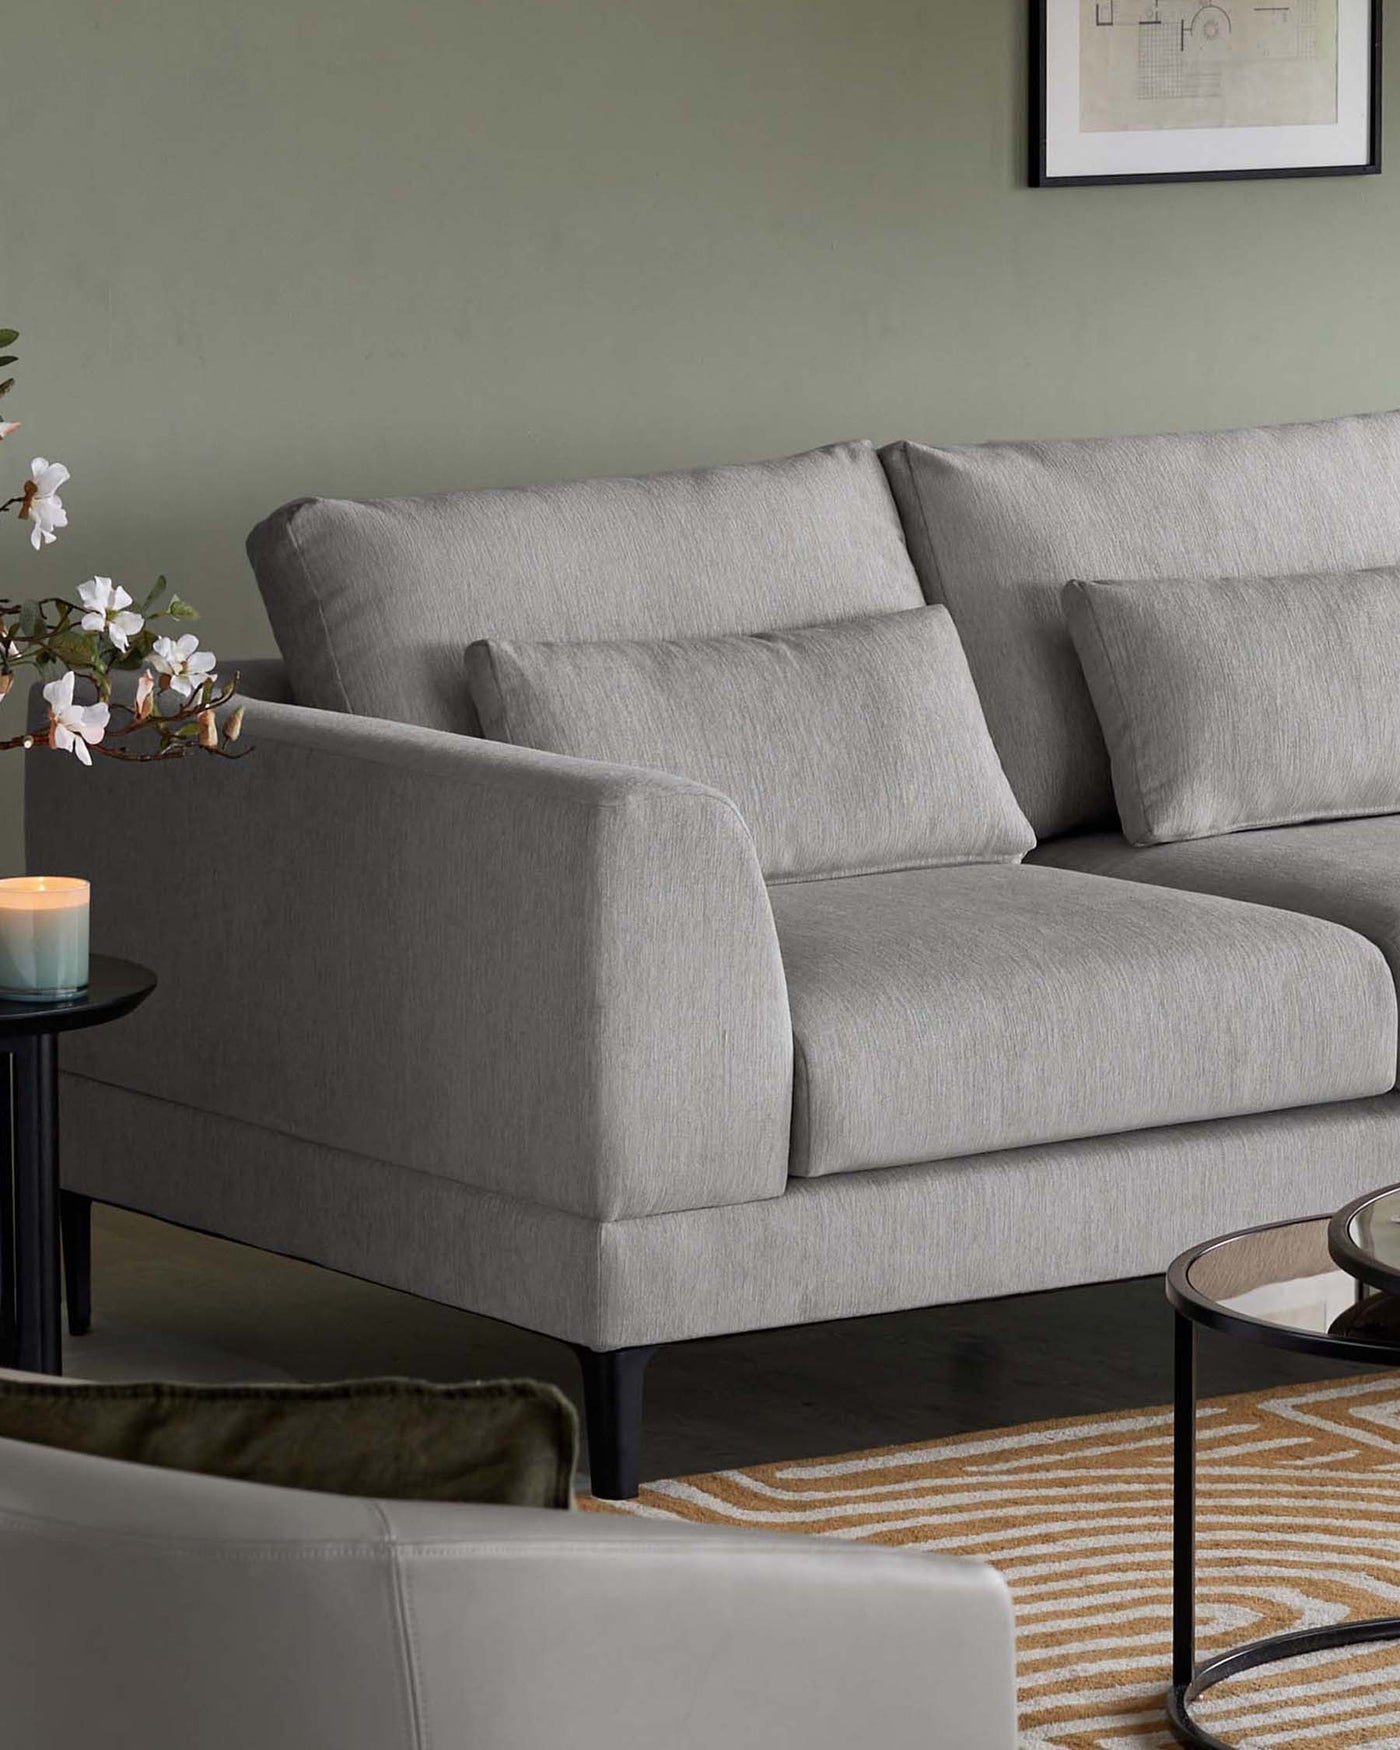 Elegant modern three-seater sofa with a sleek profile, upholstered in light grey textured fabric, featuring plush back cushions and a single seat cushion, complemented by slim, dark tapered wooden legs. Beside the sofa is a minimalist round side table with a black top and matching slender legs, paired with a small decorative candle. The setting includes a muted green wall and a patterned rug with earthy tones partially visible, enhancing the contemporary aesthetic of the space.